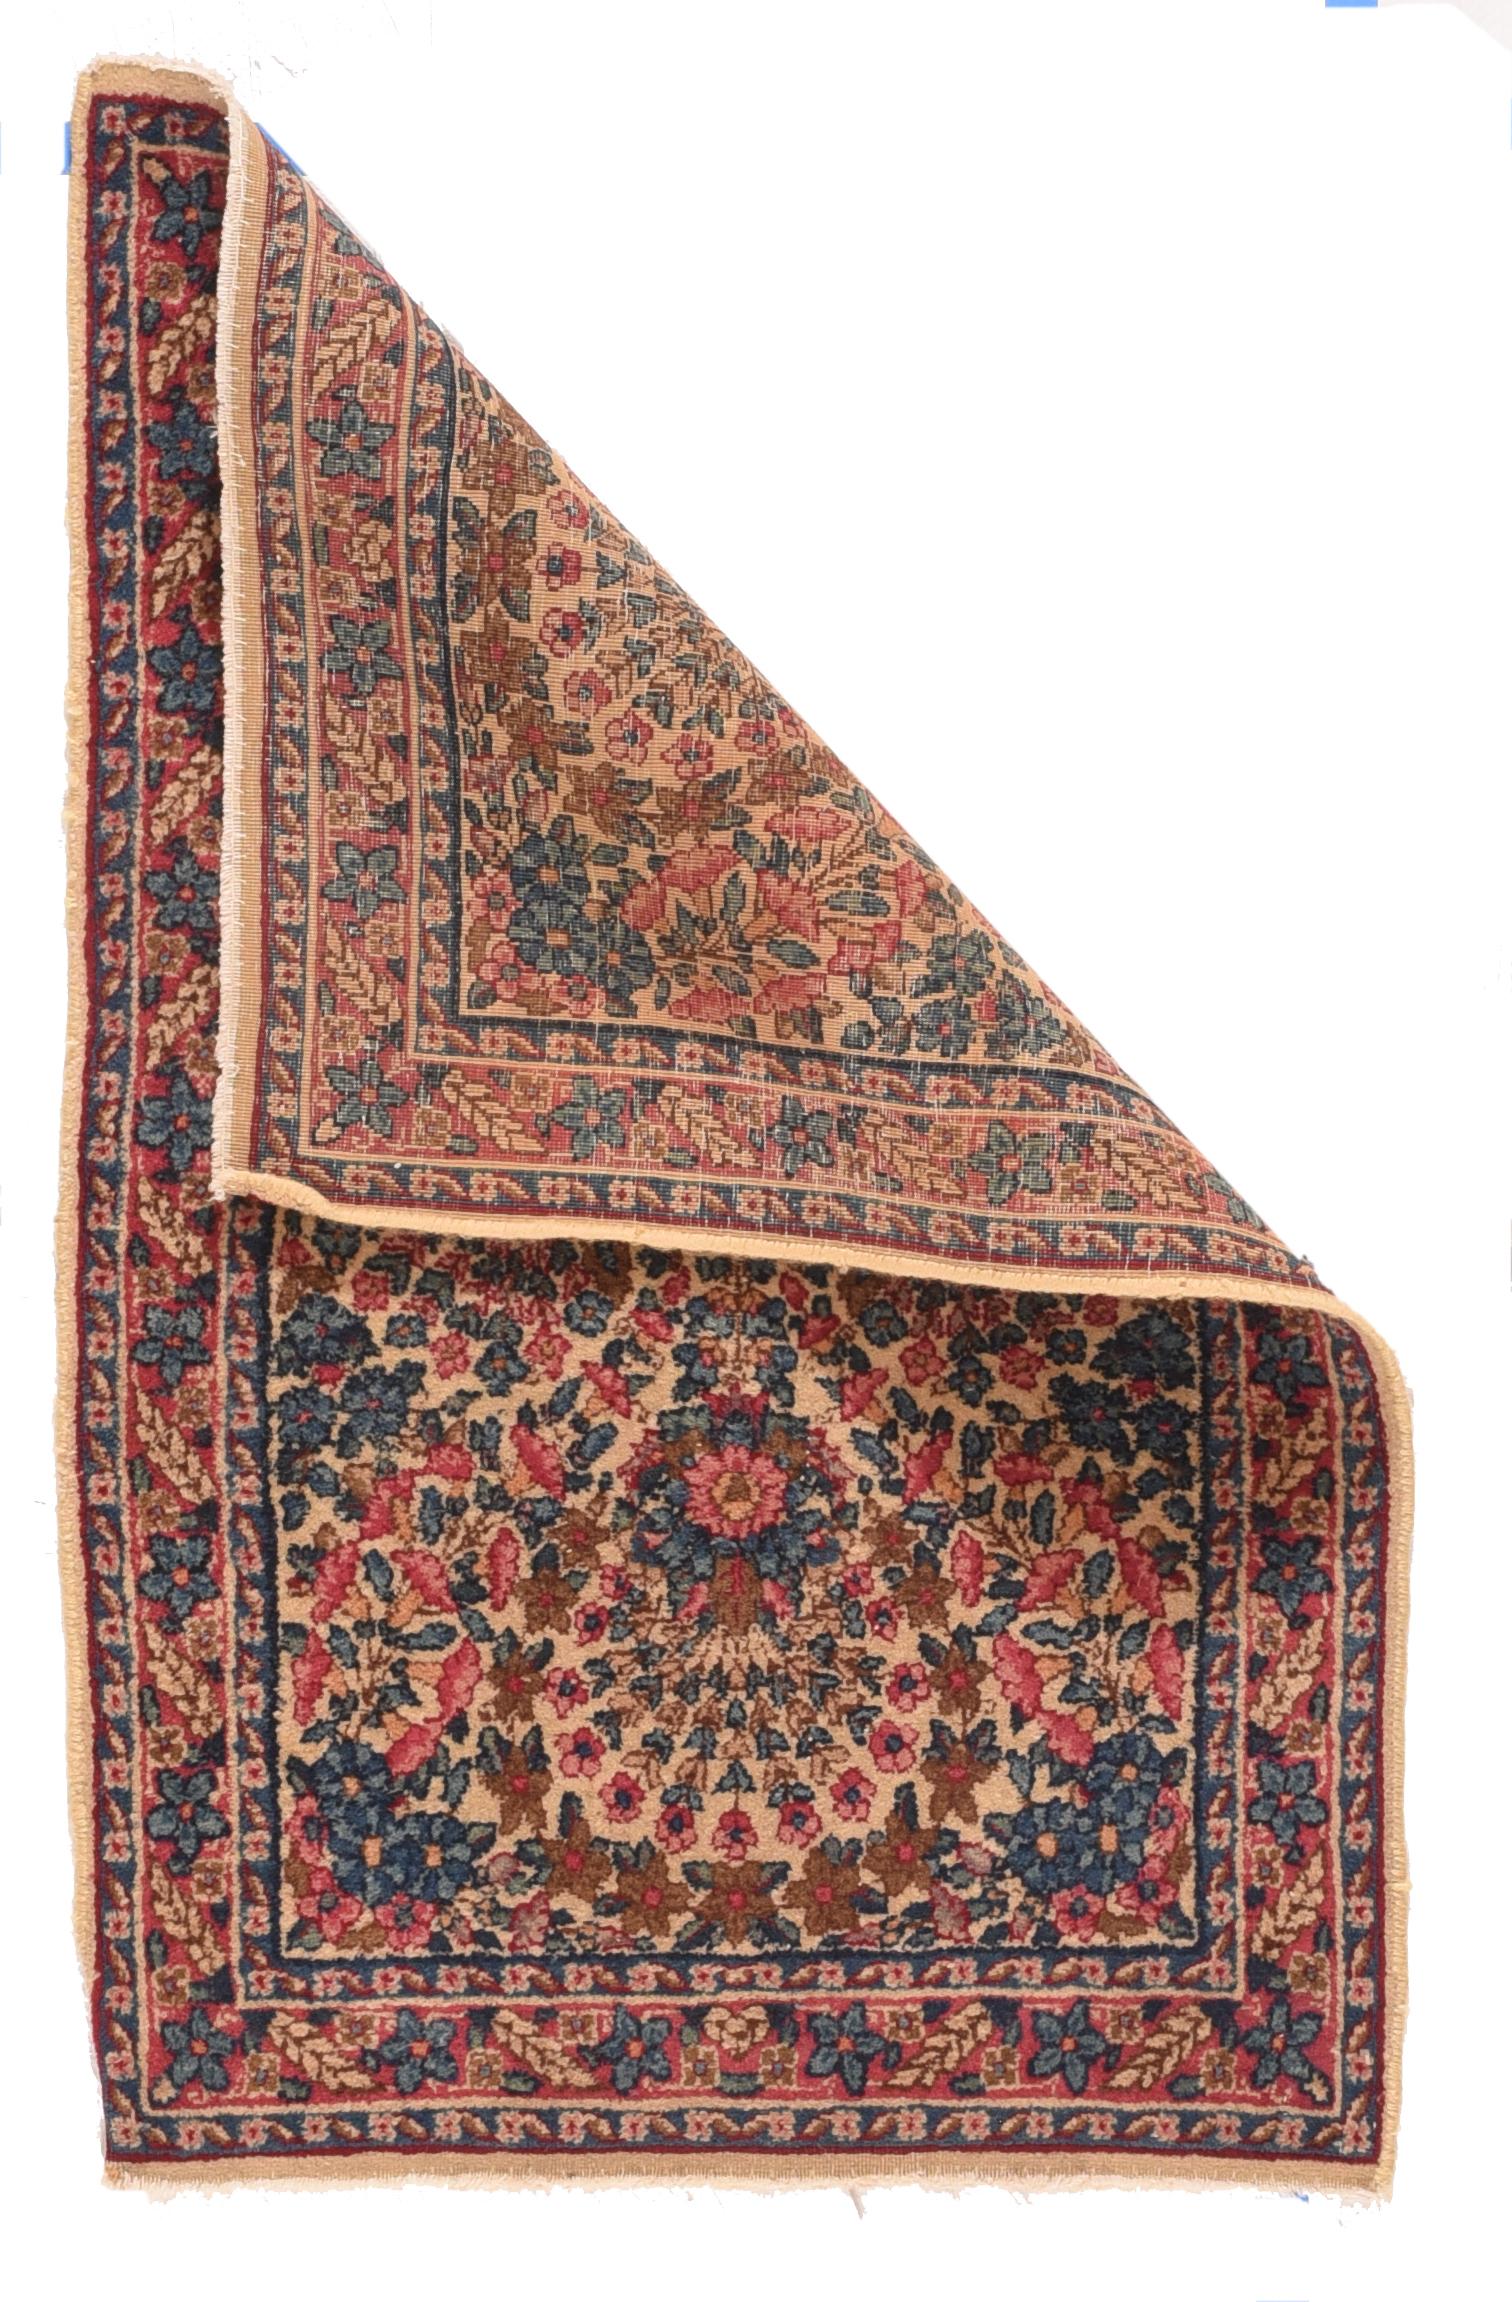 Antique Kerman Rug 2' x 3'1''. This well-woven, Interwar SE Persian city scatter exhibits a straw-sand field with four radiating rosette and multiple straight raceme medallions, with upper and lower swags of red flowers and corner elements of